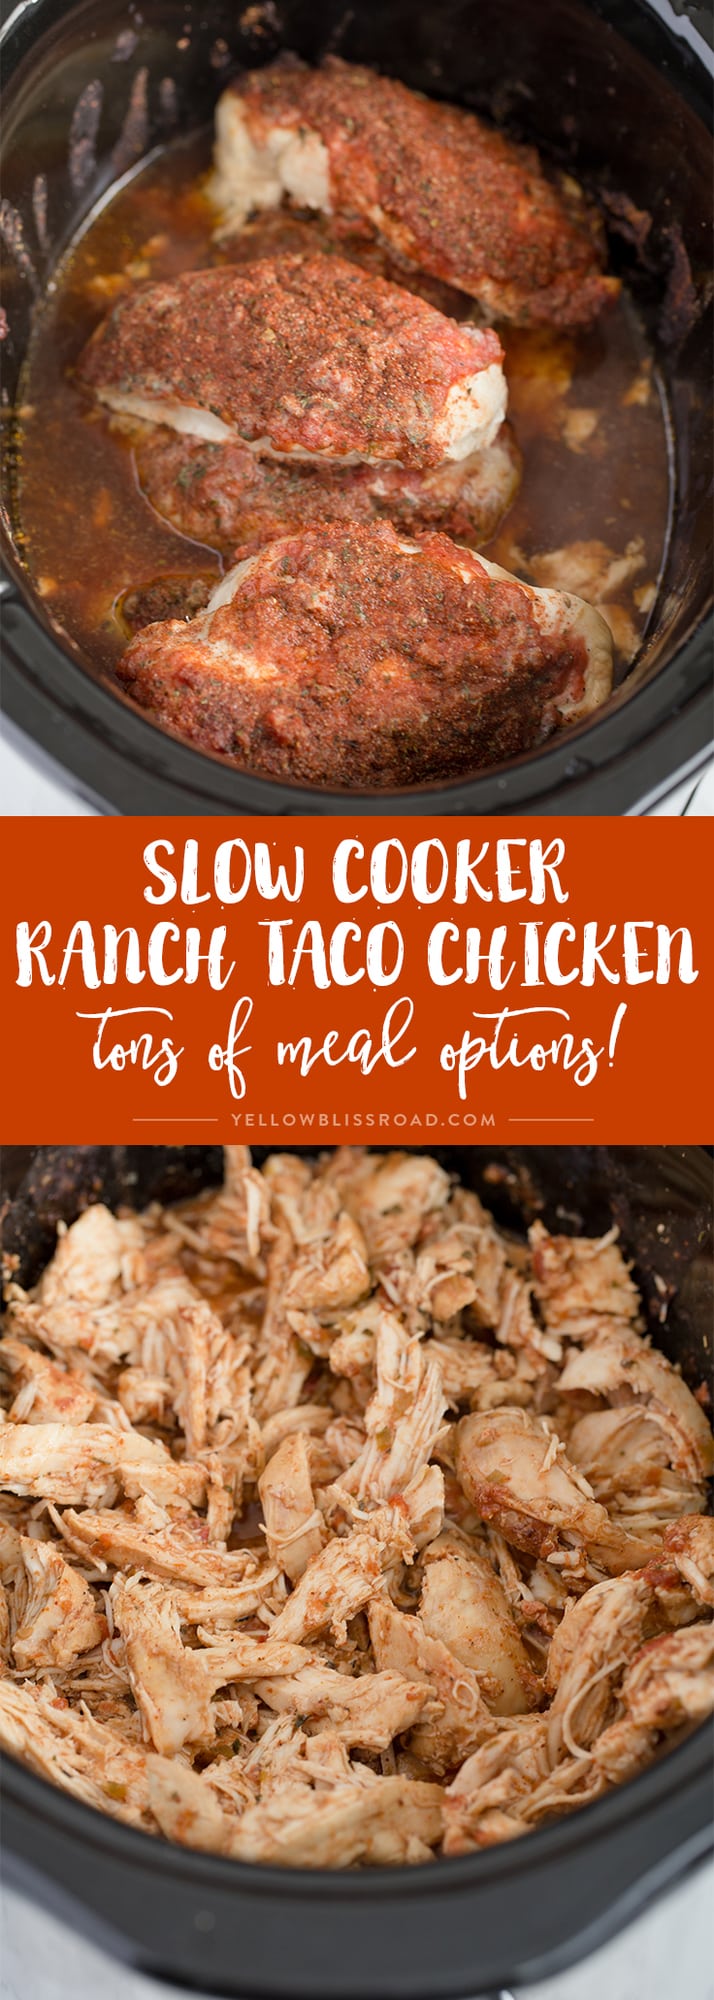 Slow Cooker Ranch Taco Chicken - so many delicious meal options from tacos to burritos to salads and more! Great for Cinco de Mayo!